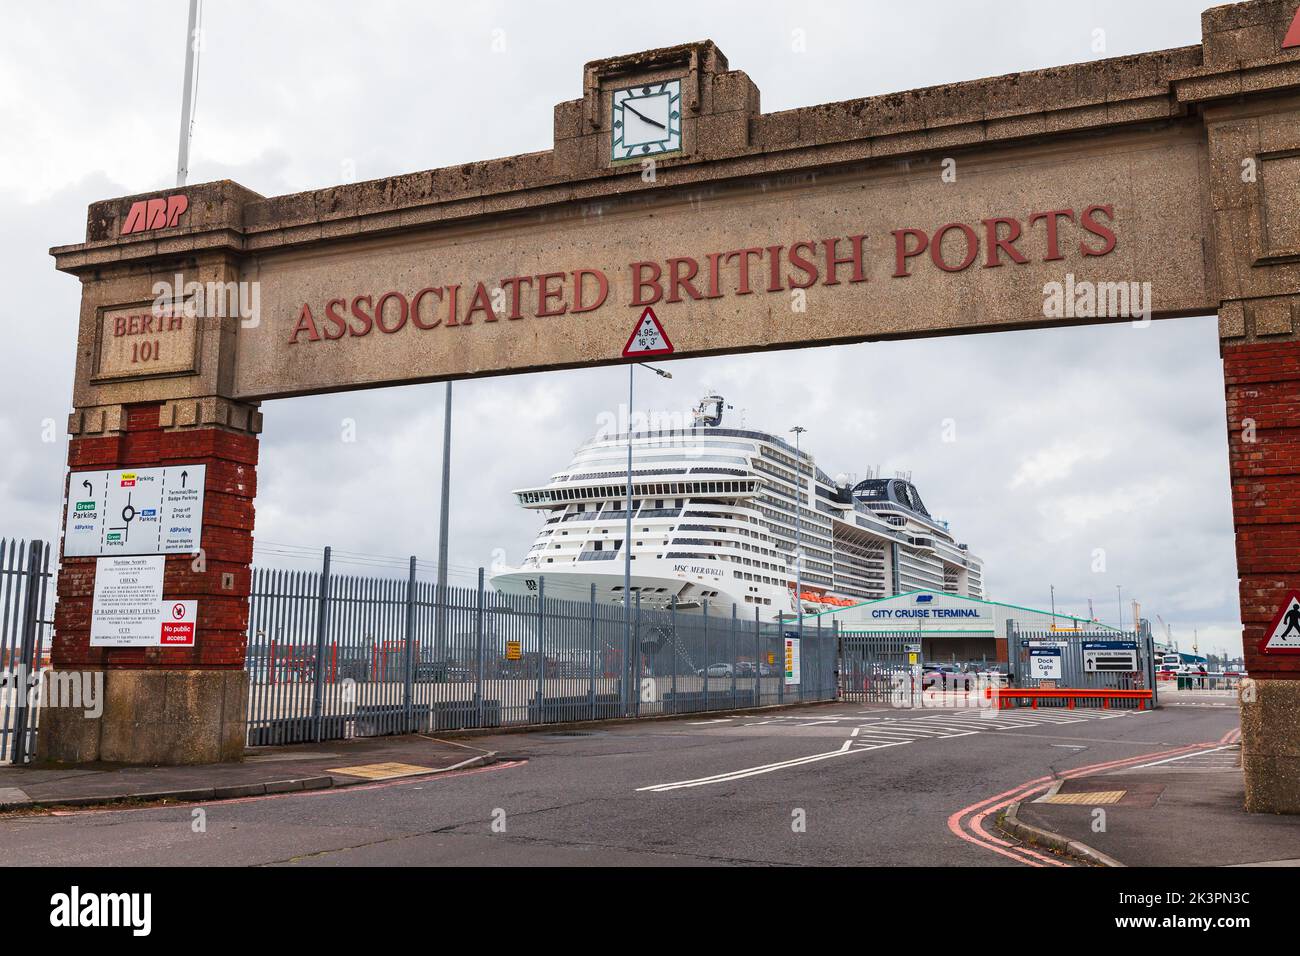 Southampton, United Kingdom - April 24, 2019: Associated British Ports gate. Cruise ship MSC Meraviglia is moored in the port of Southampton at berth Stock Photo